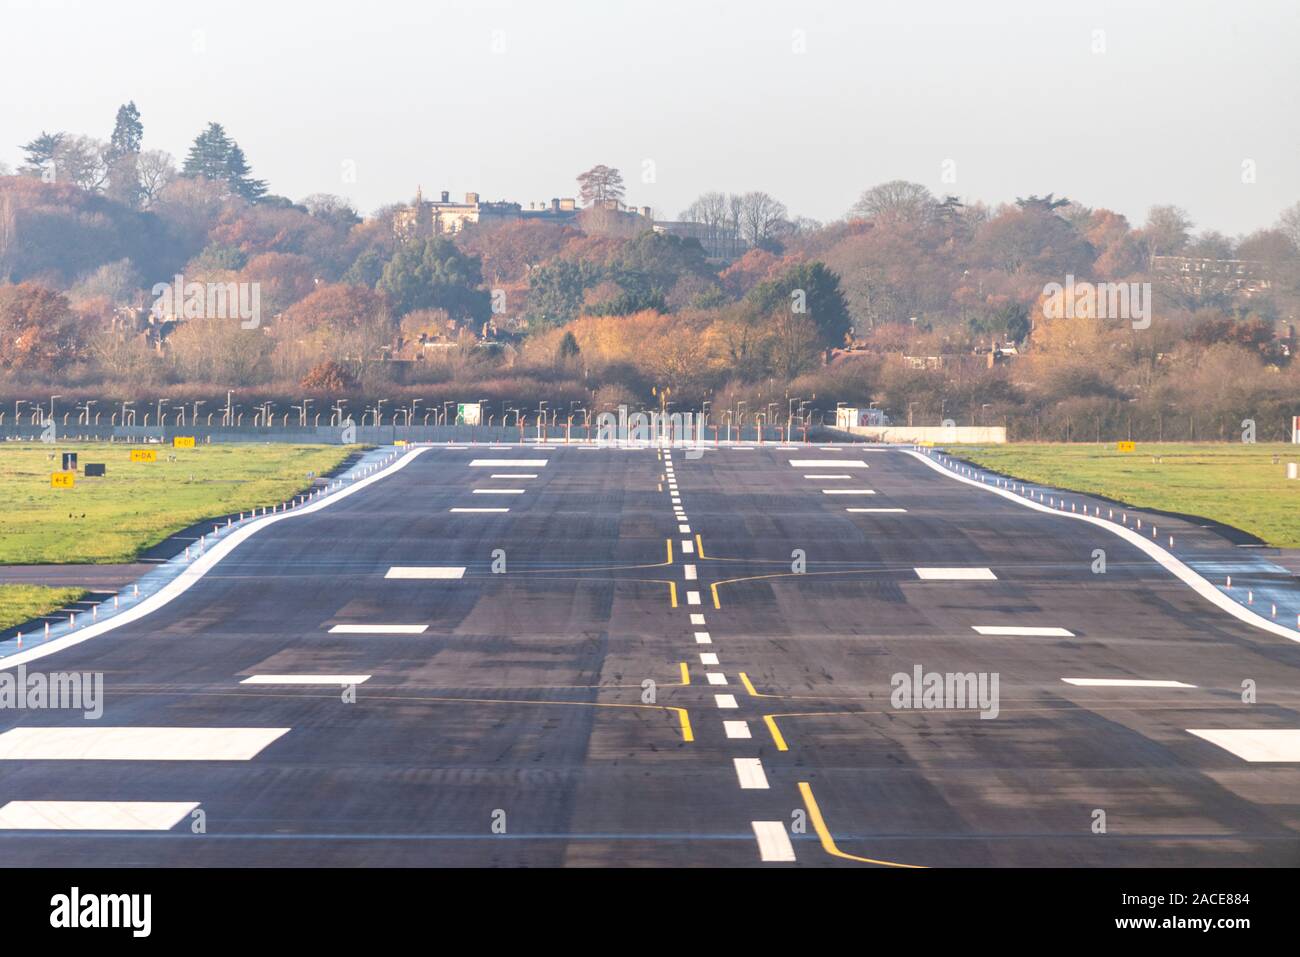 RAF Northolt Royal Air Force station in South Ruislip, Hillingdon, London, UK. £23 million resurfaced runway completed Lagan Aviation & Infrastructure Stock Photo